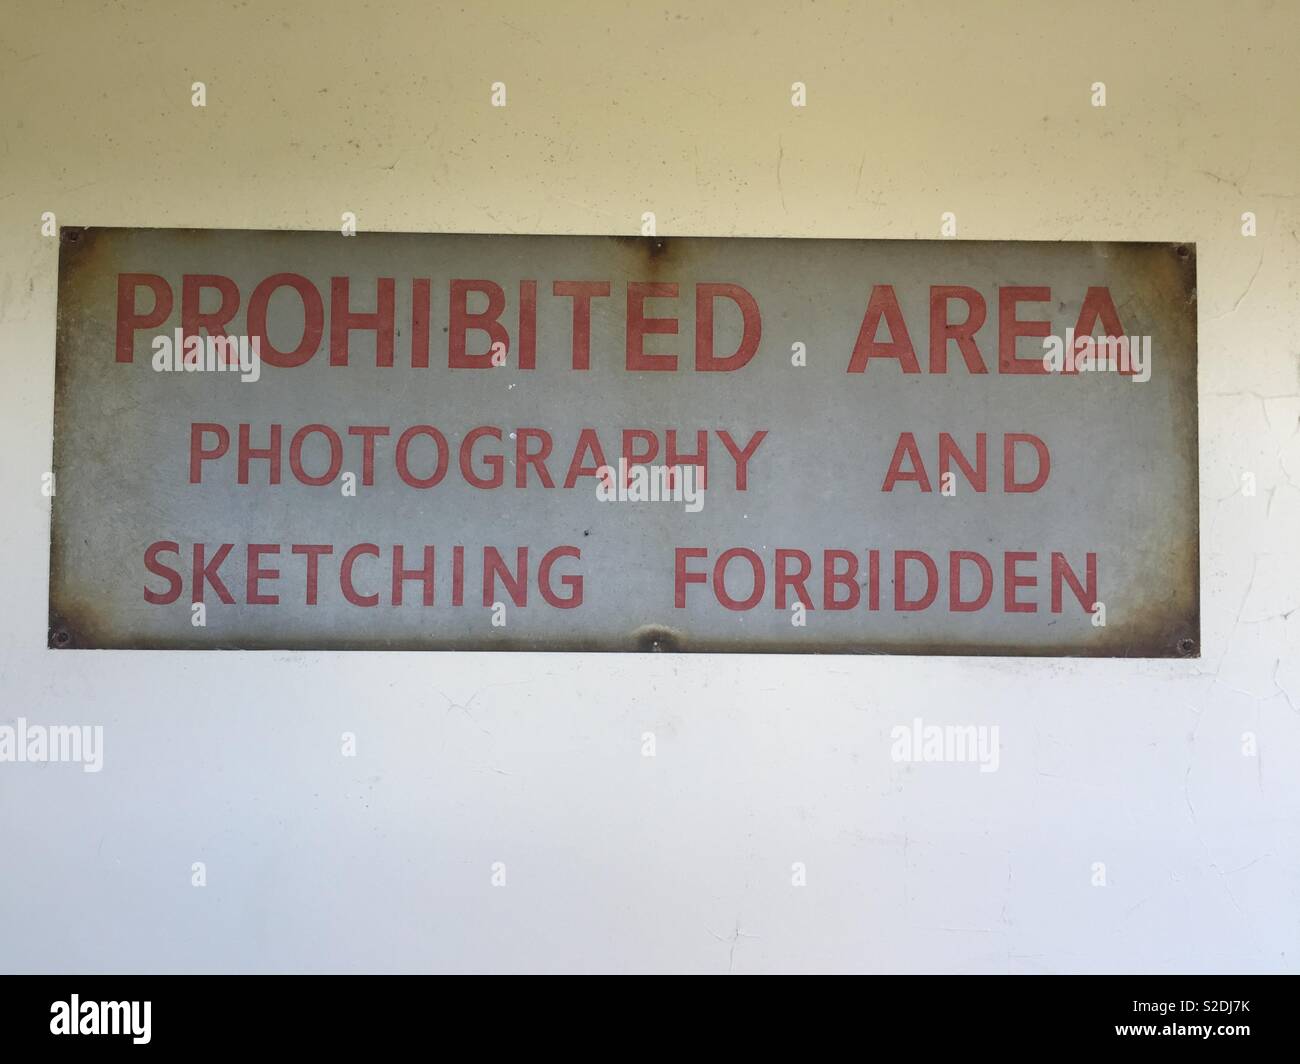 Prohibited Area Photography and sketching forbidden sign - MOD Ministry of Defence, Orford Ness, Suffolk, England Stock Photo